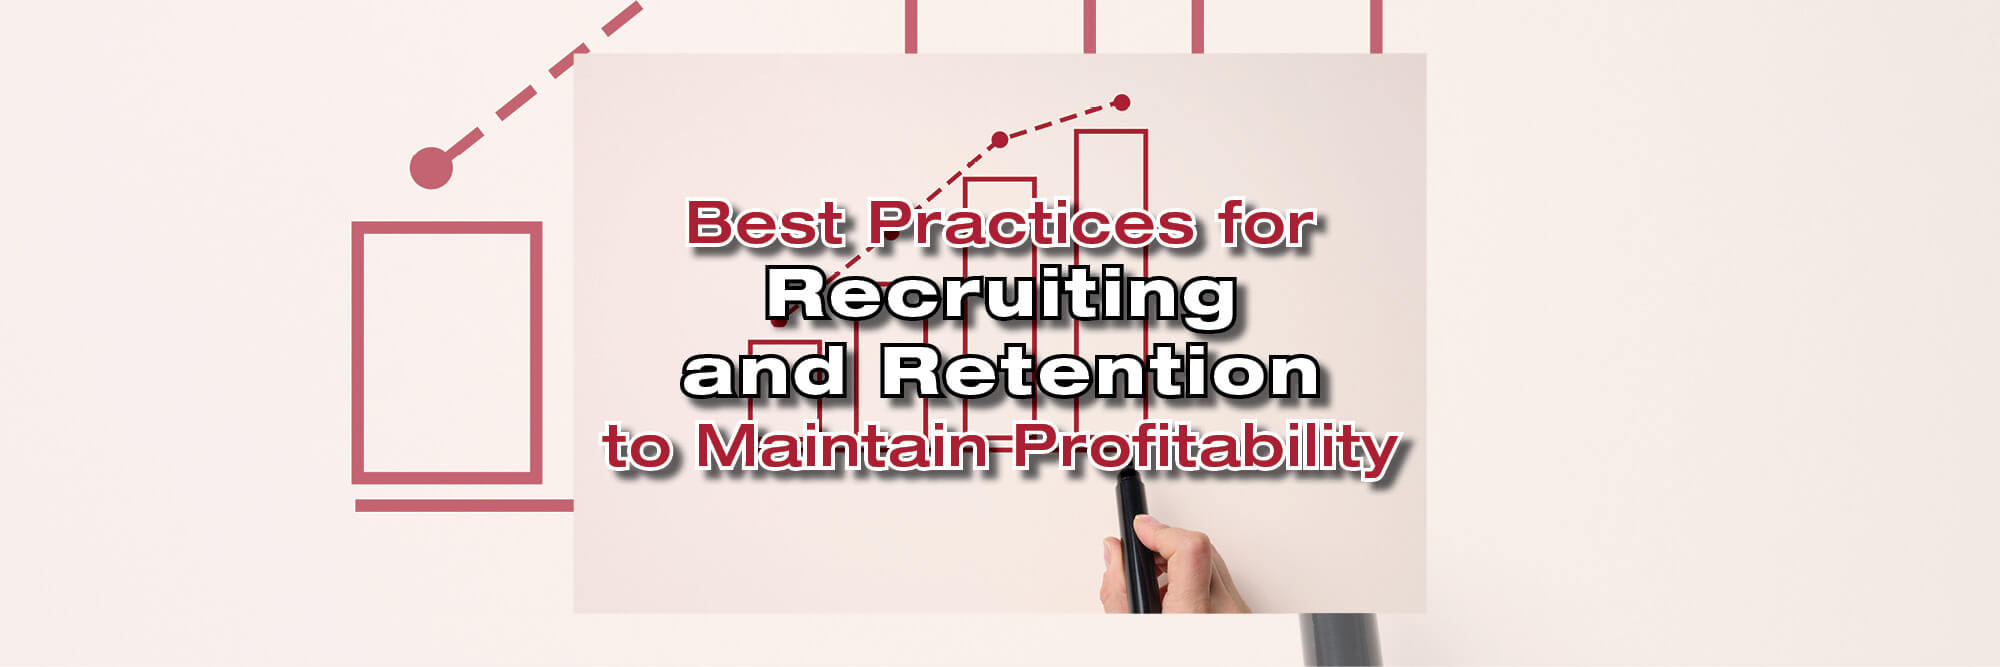 Best Practices for Recruiting and Retention to Maintain Profitability (2022)